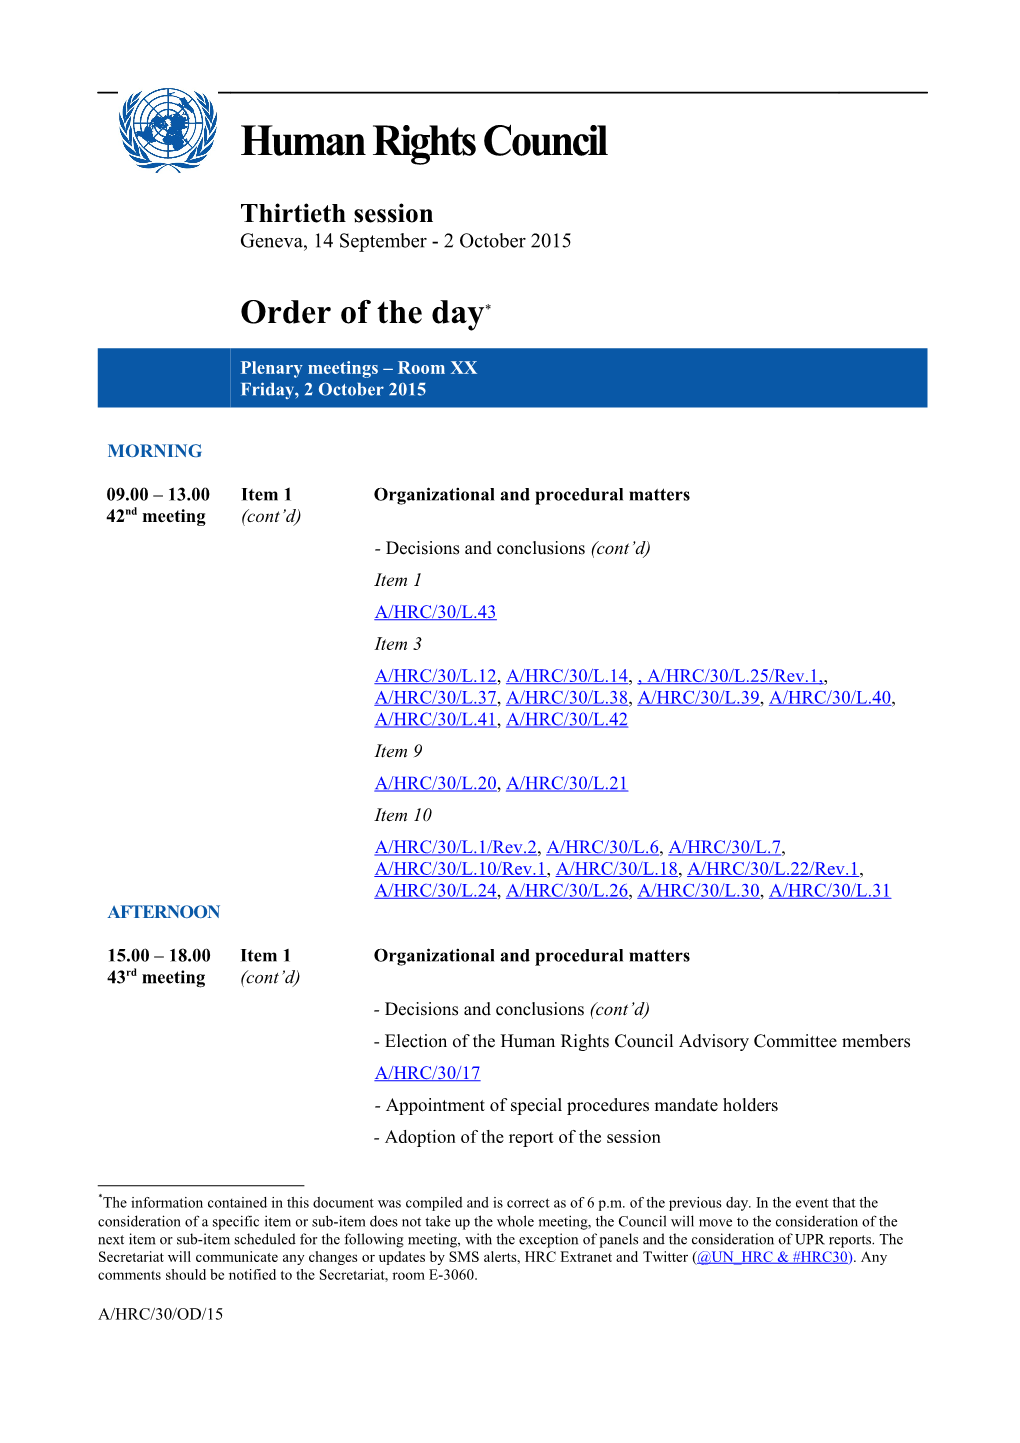 Order of the Day, Friday 2 October 2015